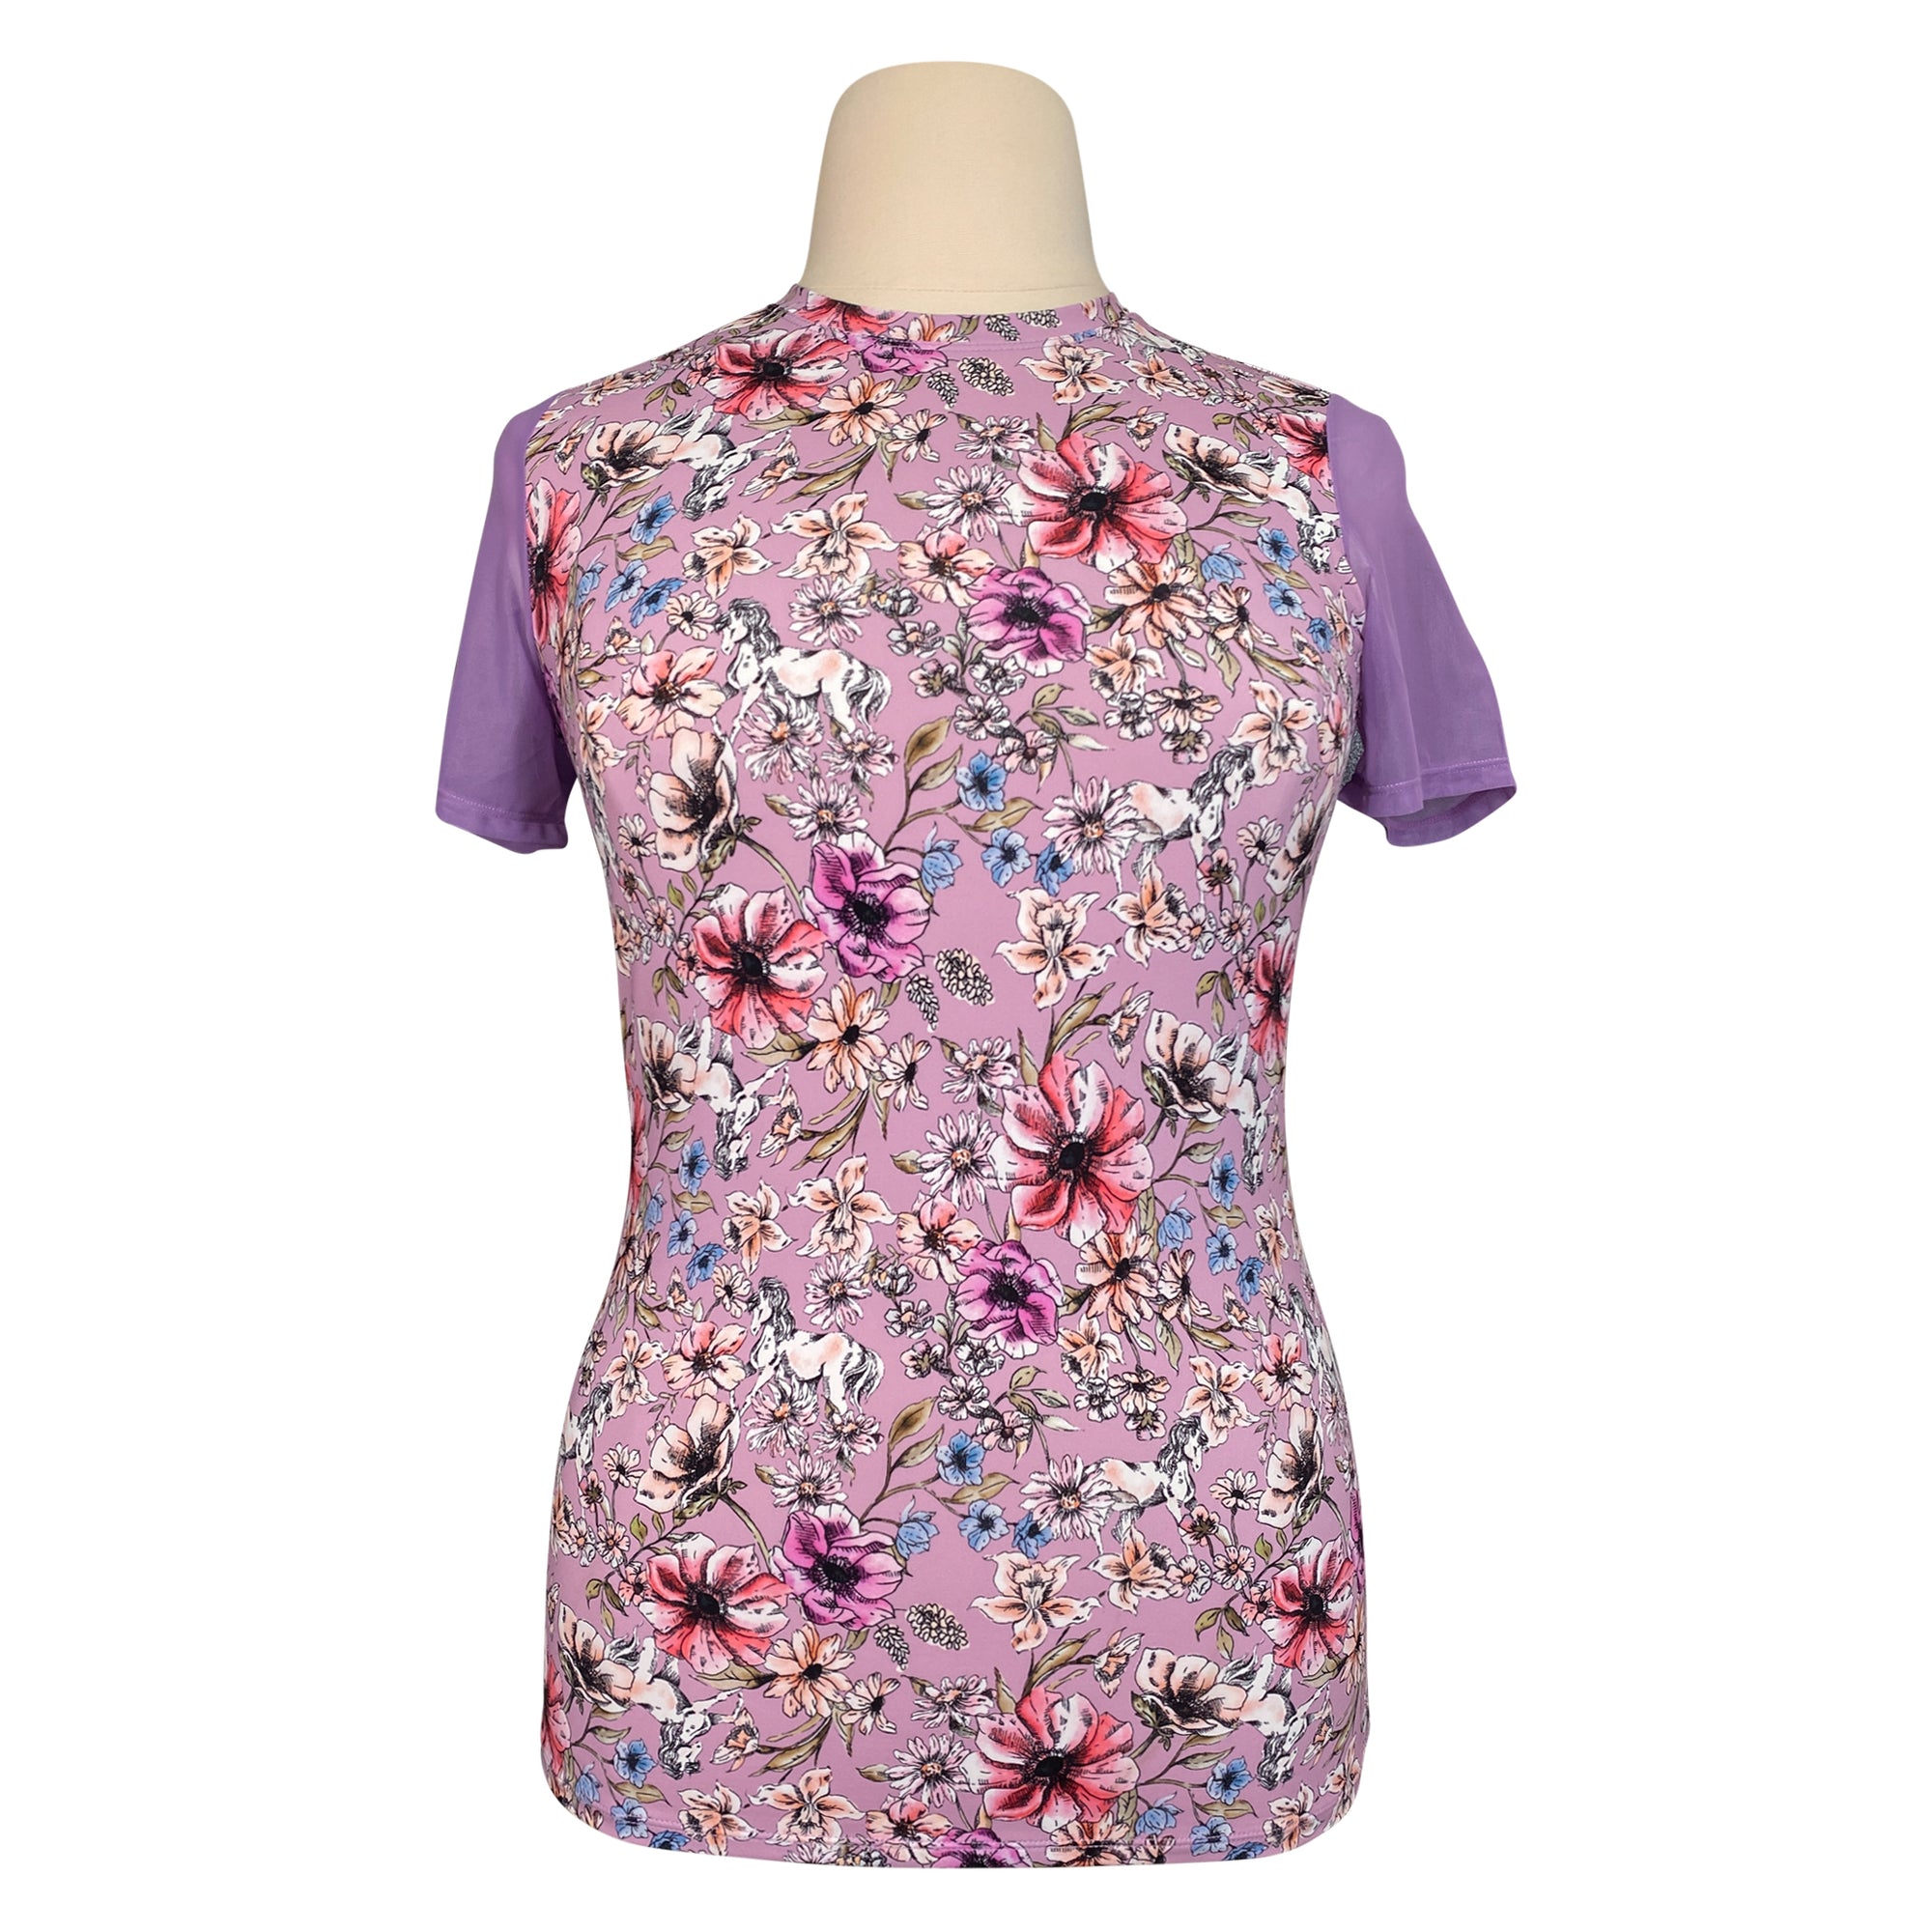 Hannah Childs  'Shannon' Top in Horse Blossom